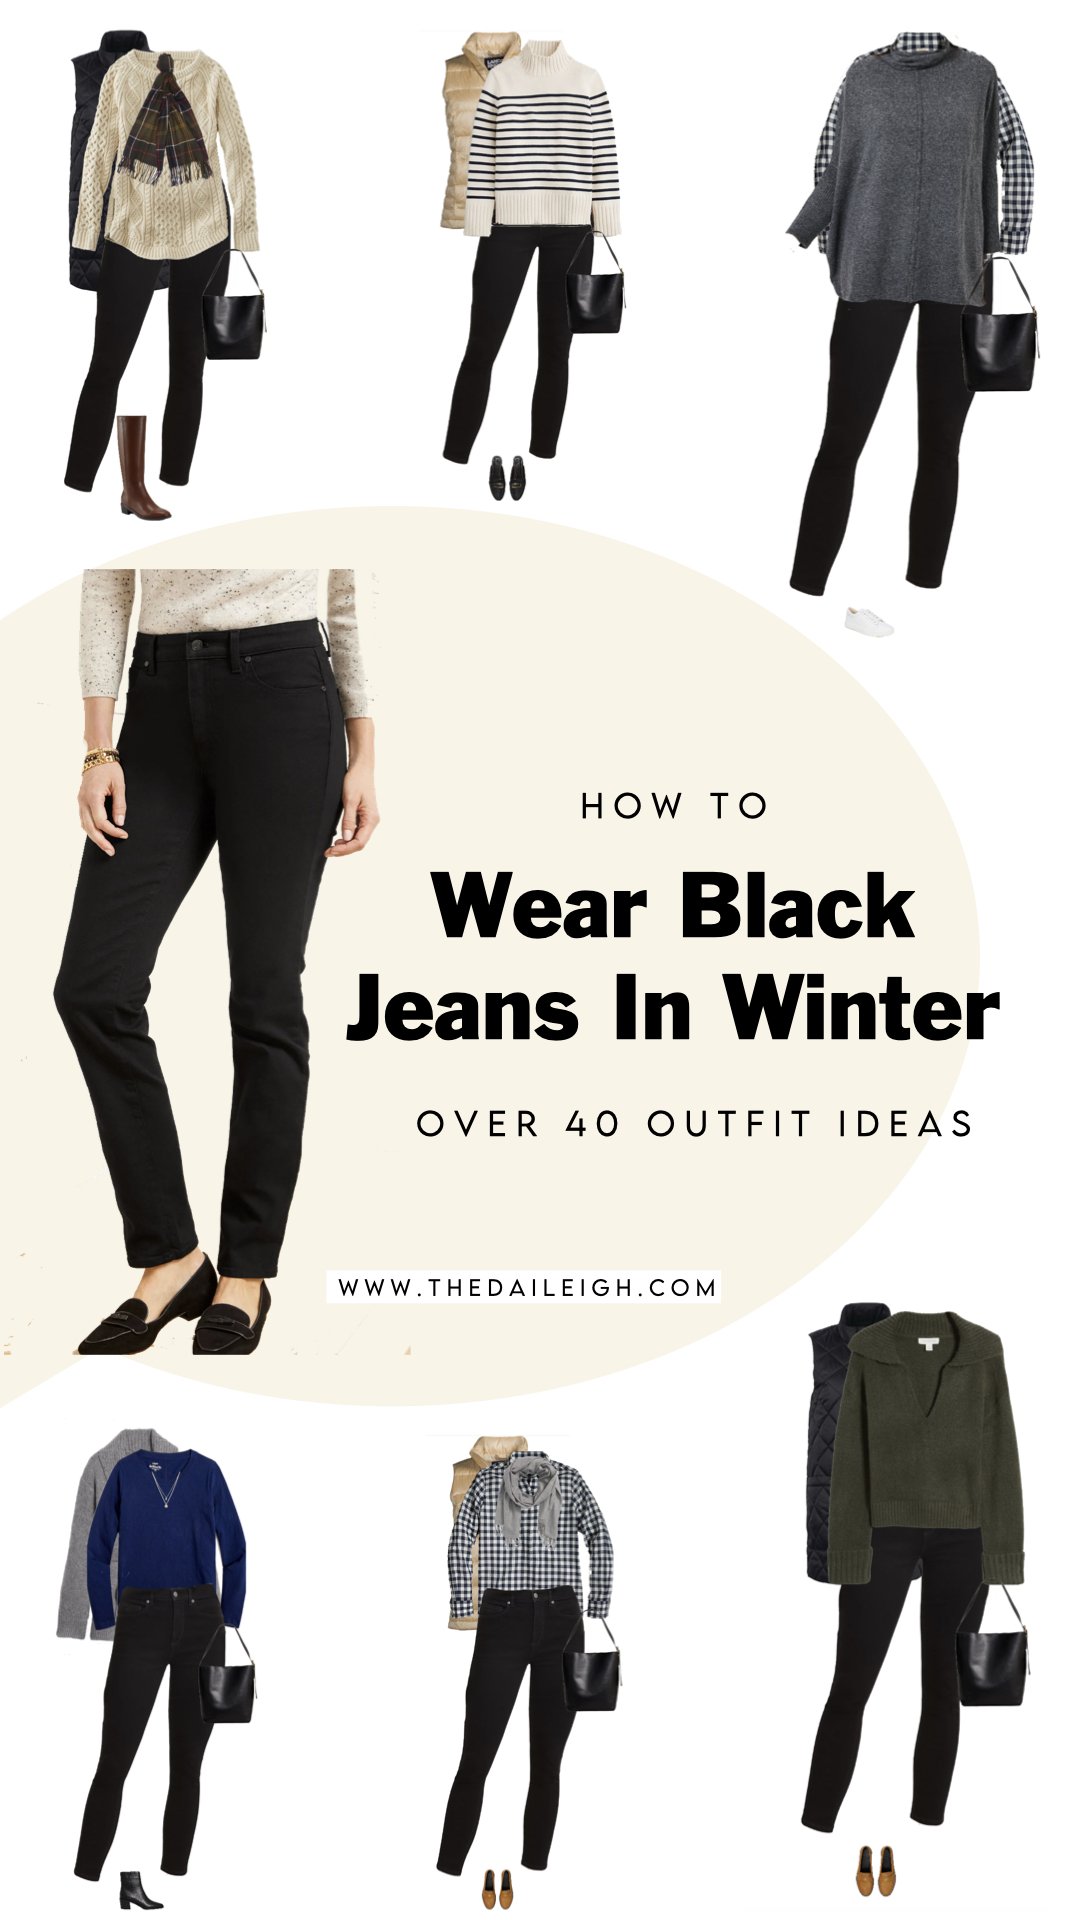 How To Wear Black Jeans in Winter — THE DAILEIGH